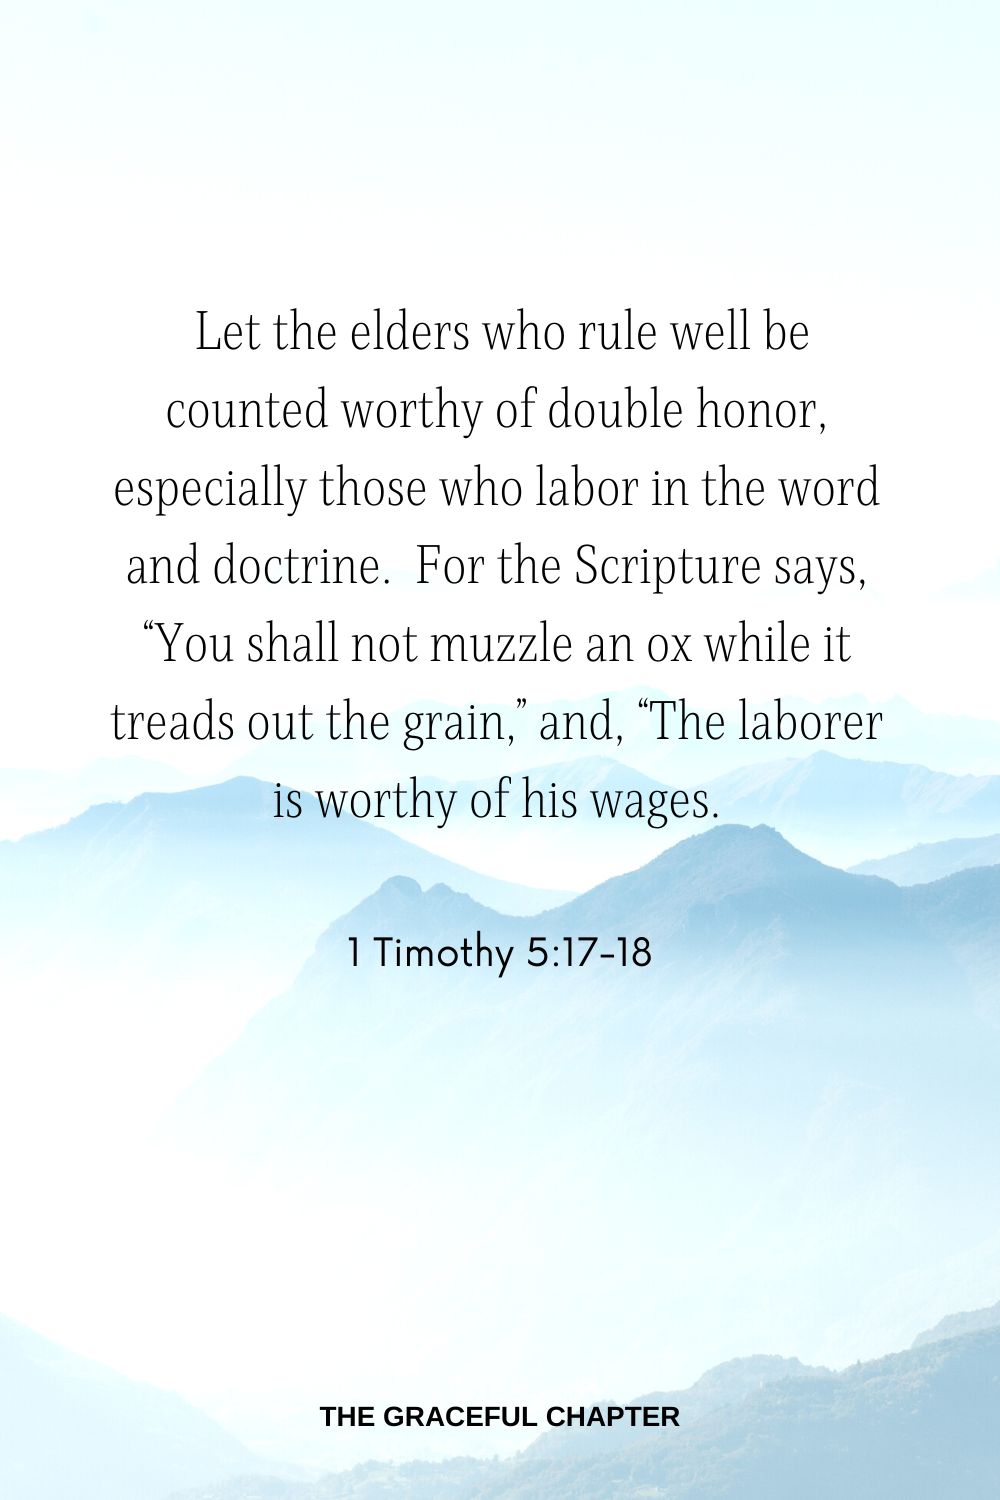  Let the elders who rule well be counted worthy of double honor, especially those who labor in the word and doctrine.  For the Scripture says, “You shall not muzzle an ox while it treads out the grain,” and, “The laborer is worthy of his wages. 1 Timothy 5:17-18